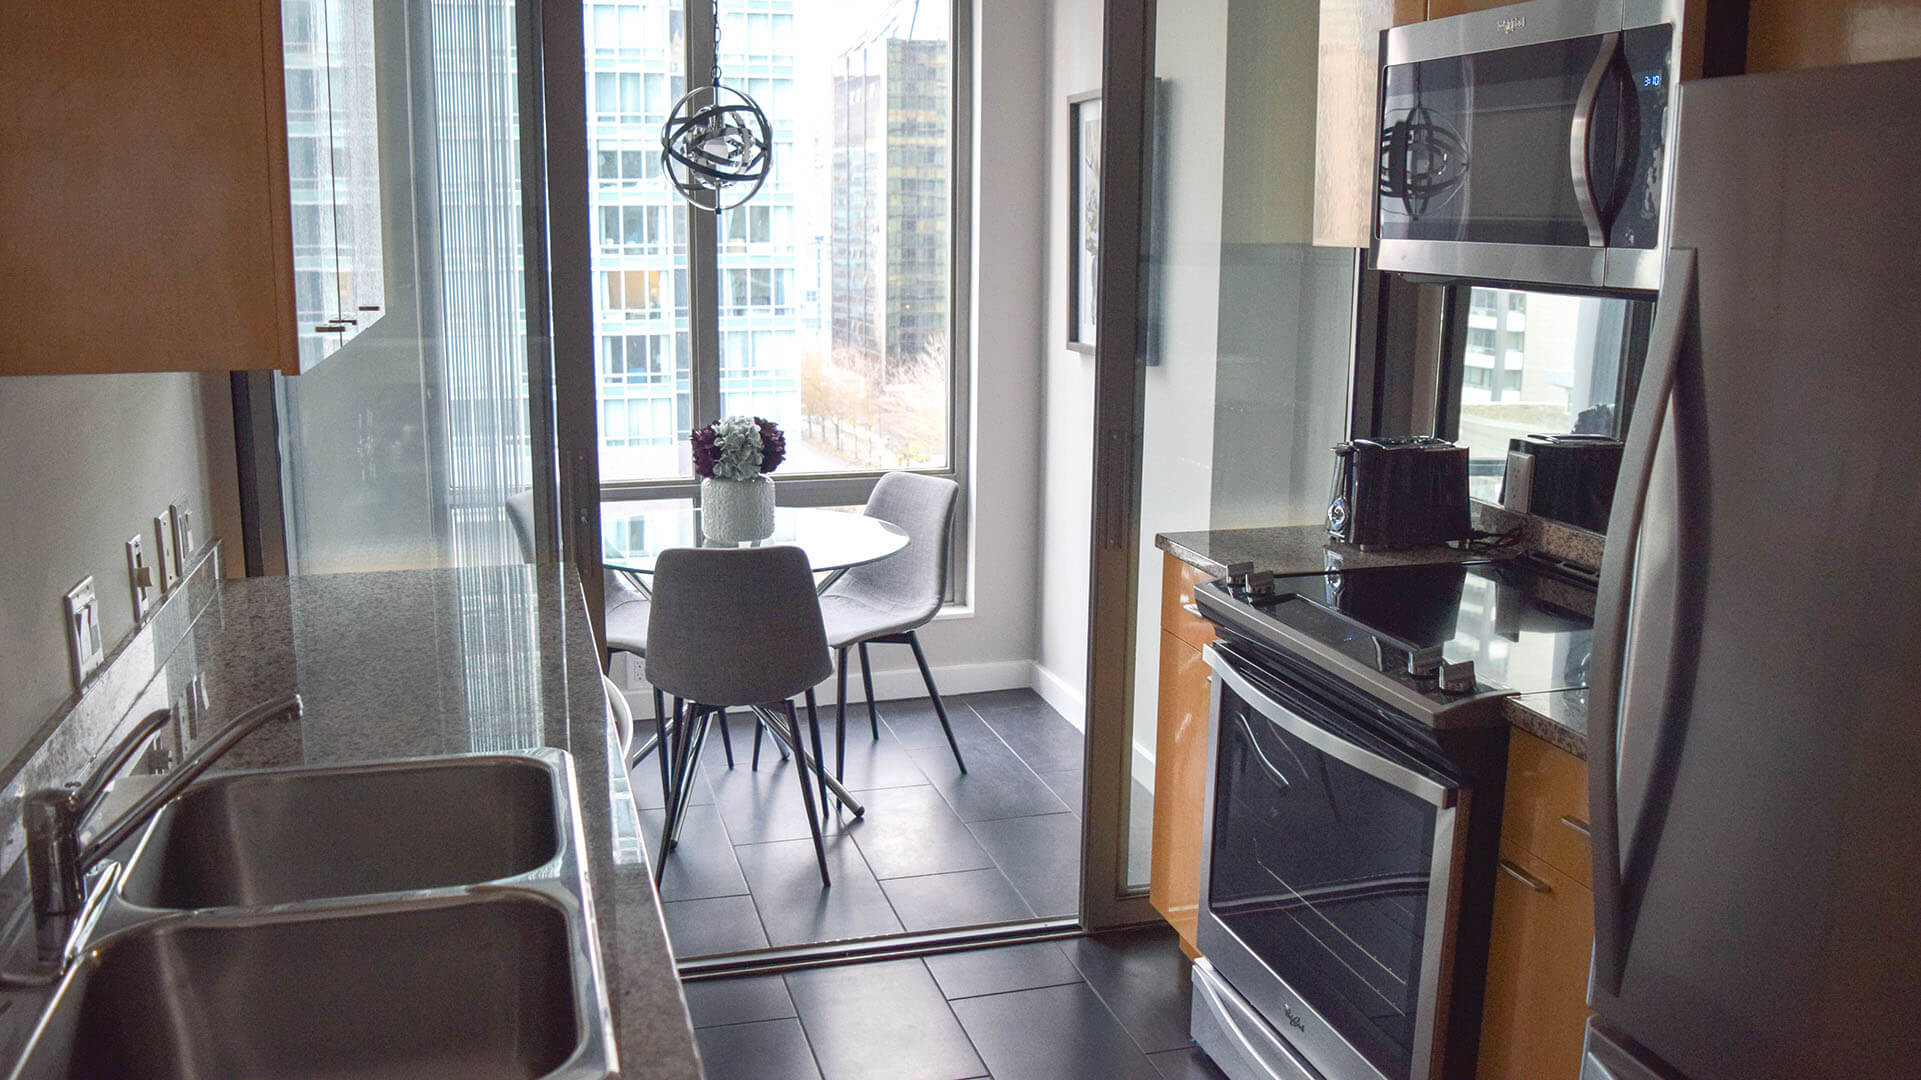 Modern kitchen with stainless steel appliances, granite countertop and dining table and chairs in the adjacent dining area in furnished apartment at Vancouver Extended Stay